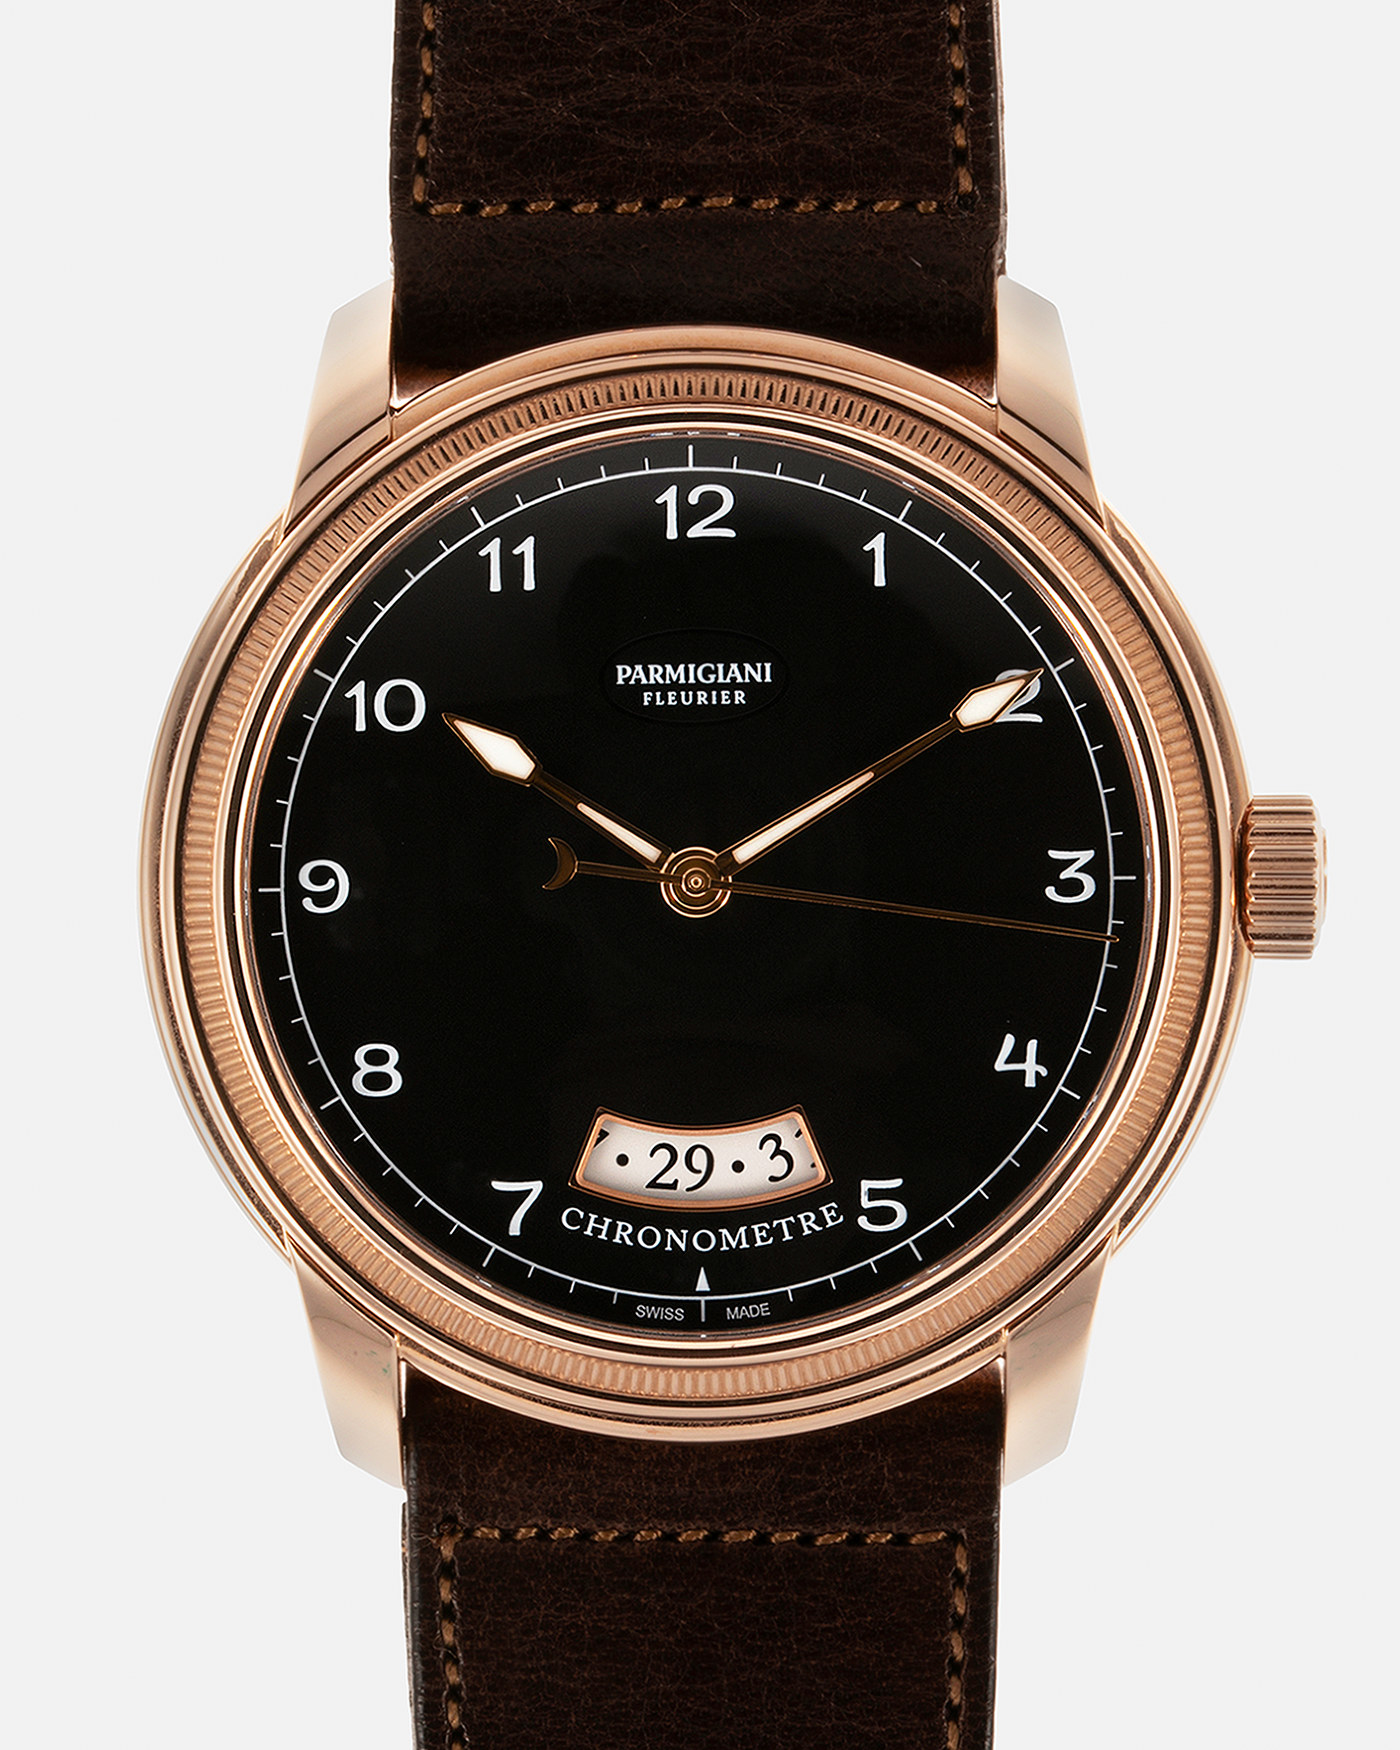 Brand: Parmigiani Fleurier Year: 2017 Model: Toric Chronometre Material: 18-carat Rose Gold Movement: PF Cal. PF 331, Self-Winding Case Diameter: 40.8mm Strap: Accurate Form Dark Brown Leather Strap with Signed 18-carat Rose Gold Tang Buckle.